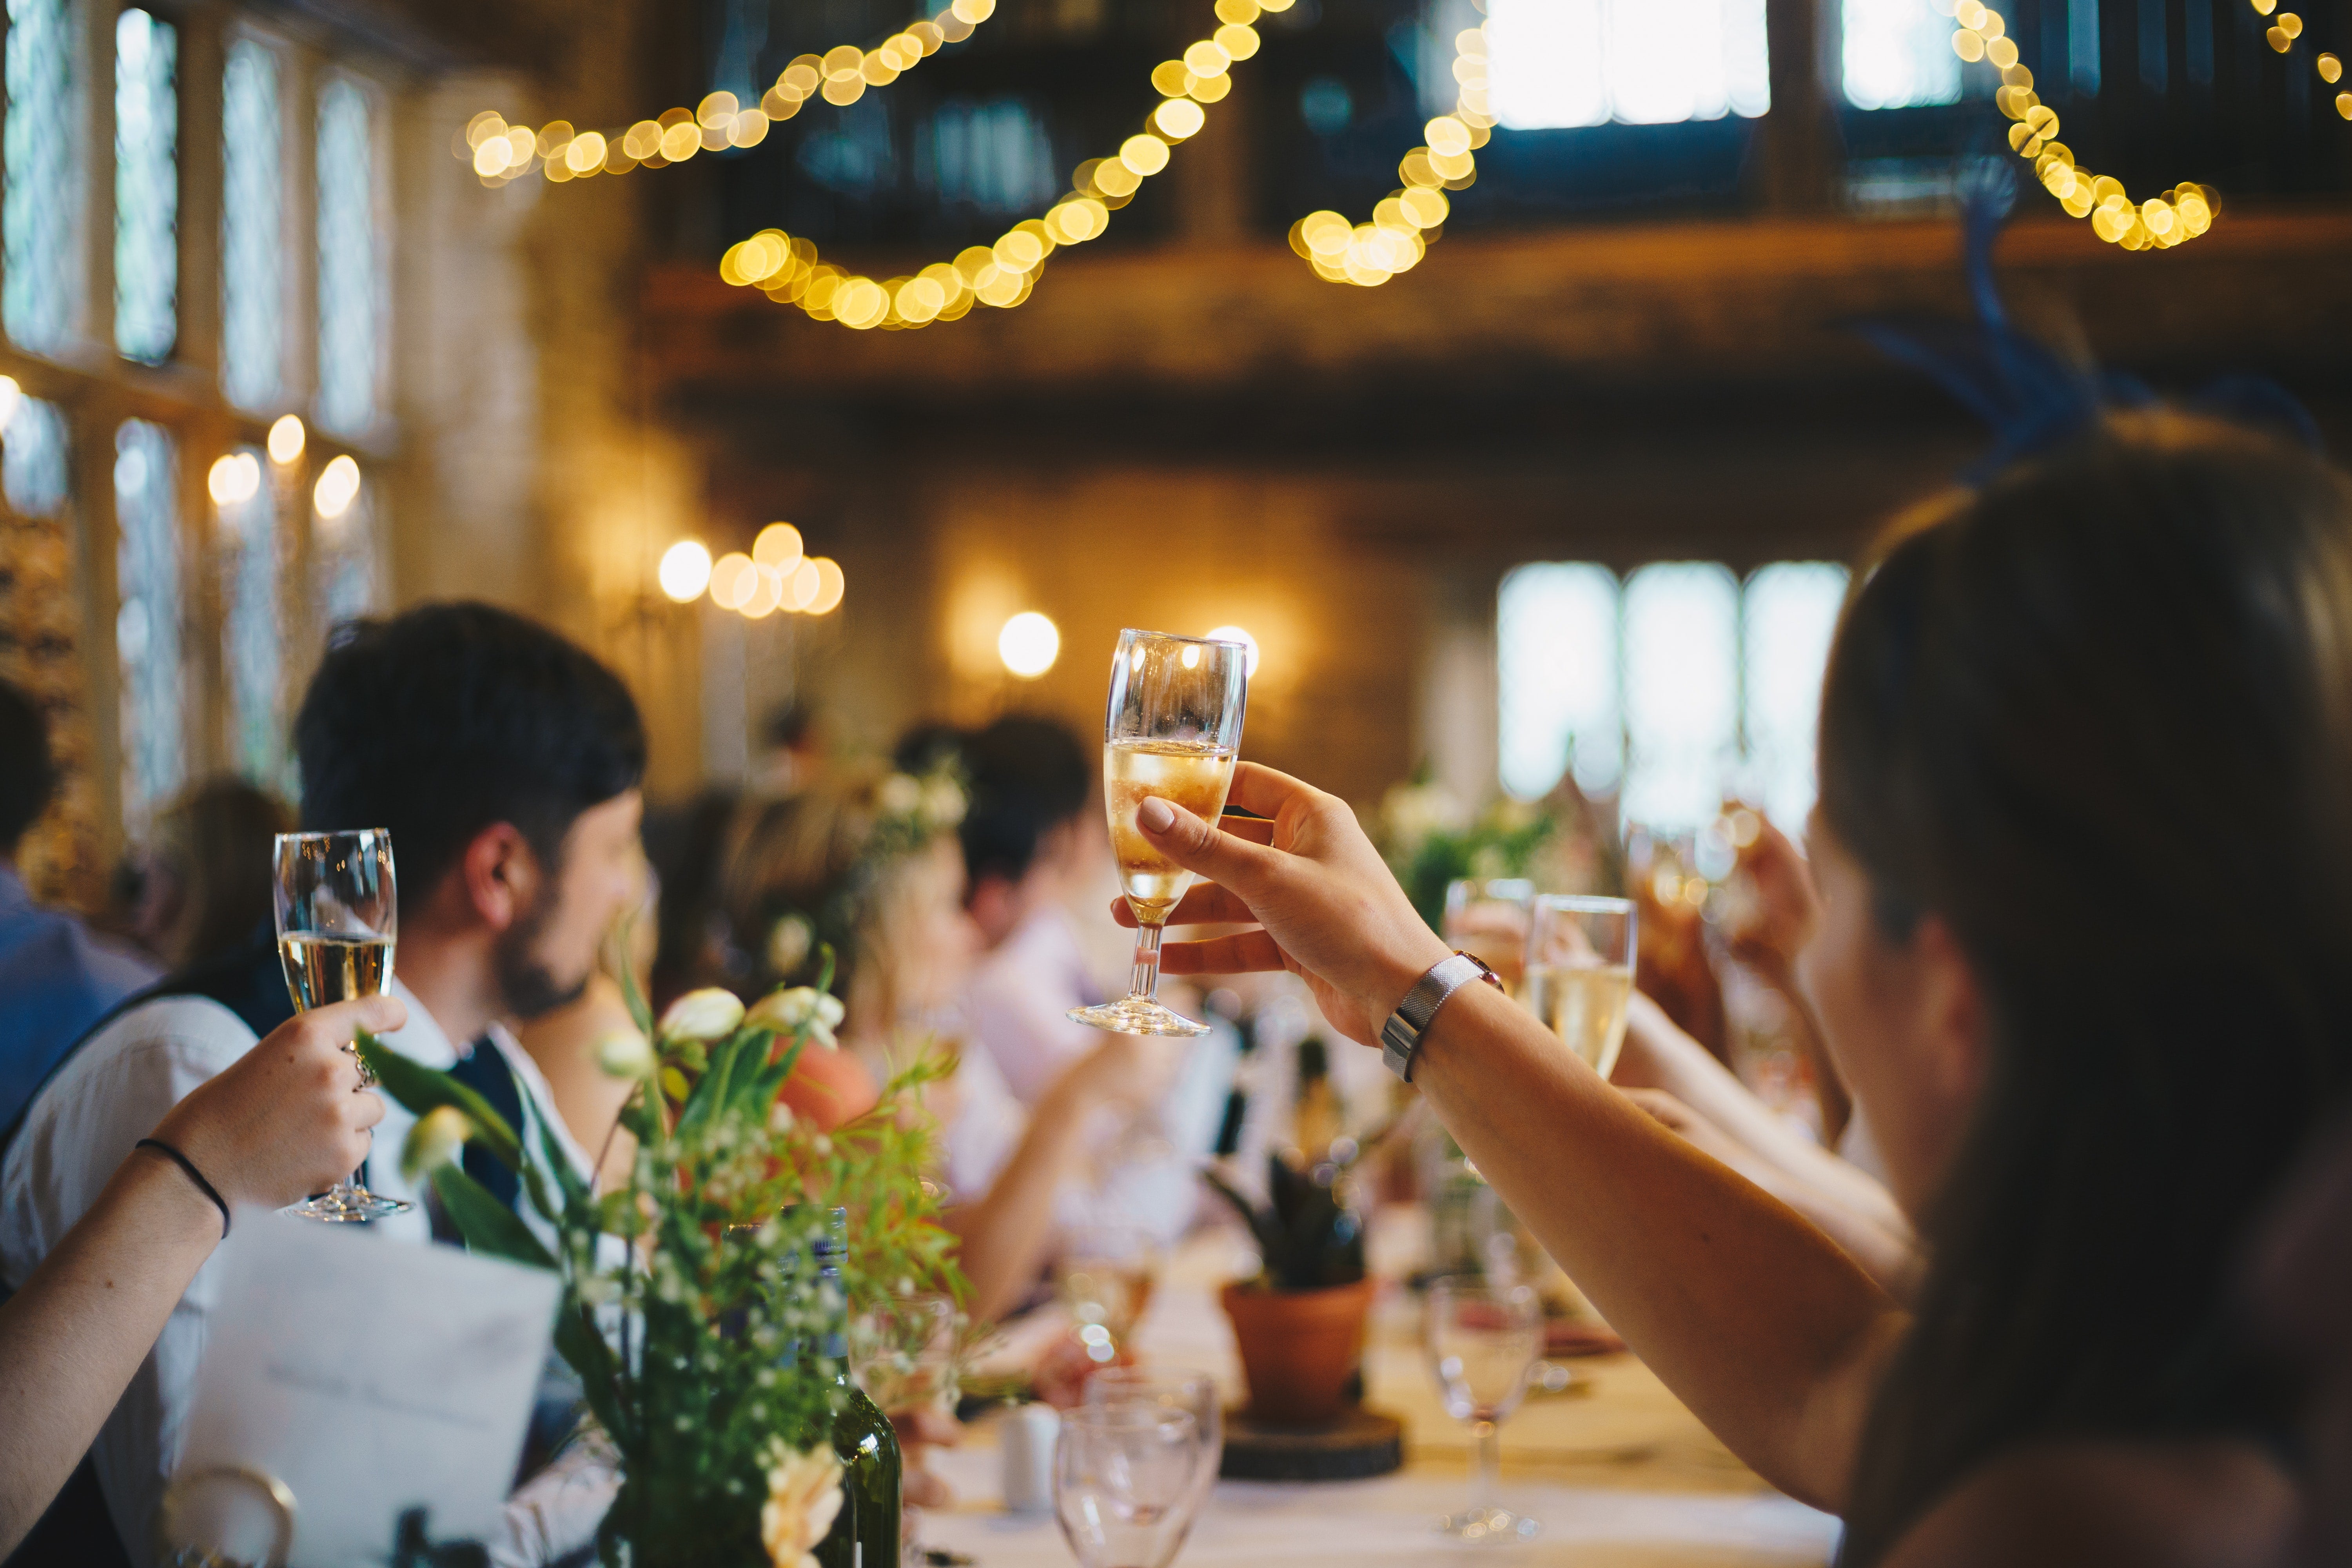 Wedding guests seated in a banquet hall toast the couple